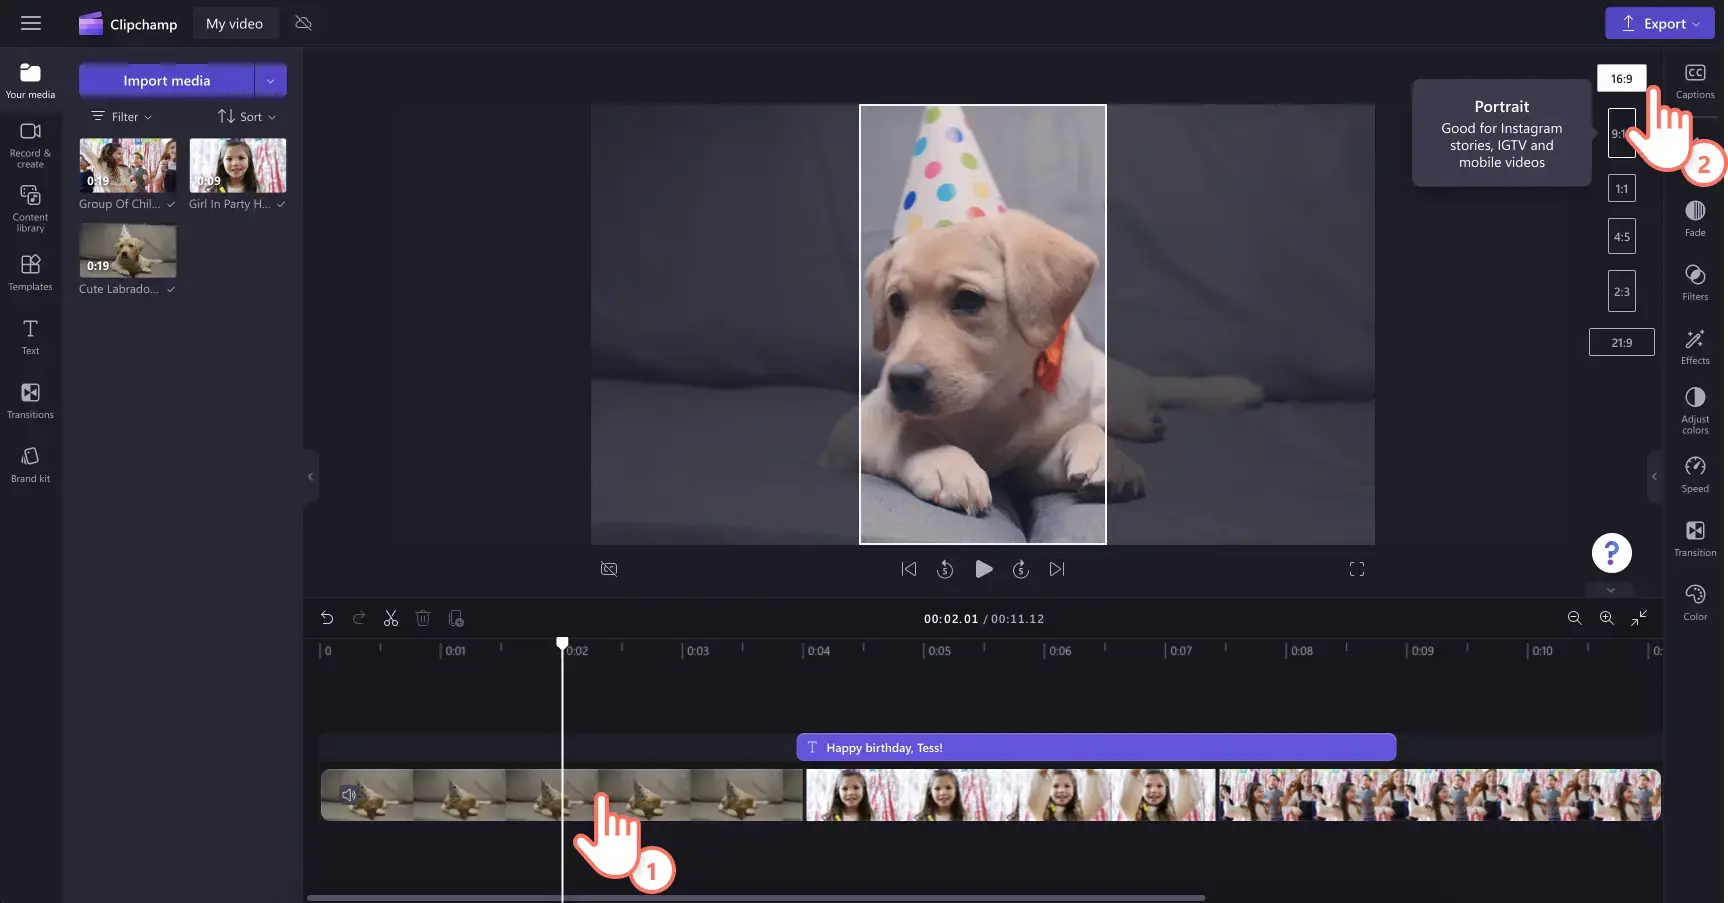 A screenshot of Climpchamp's interface where you can adjust the video size